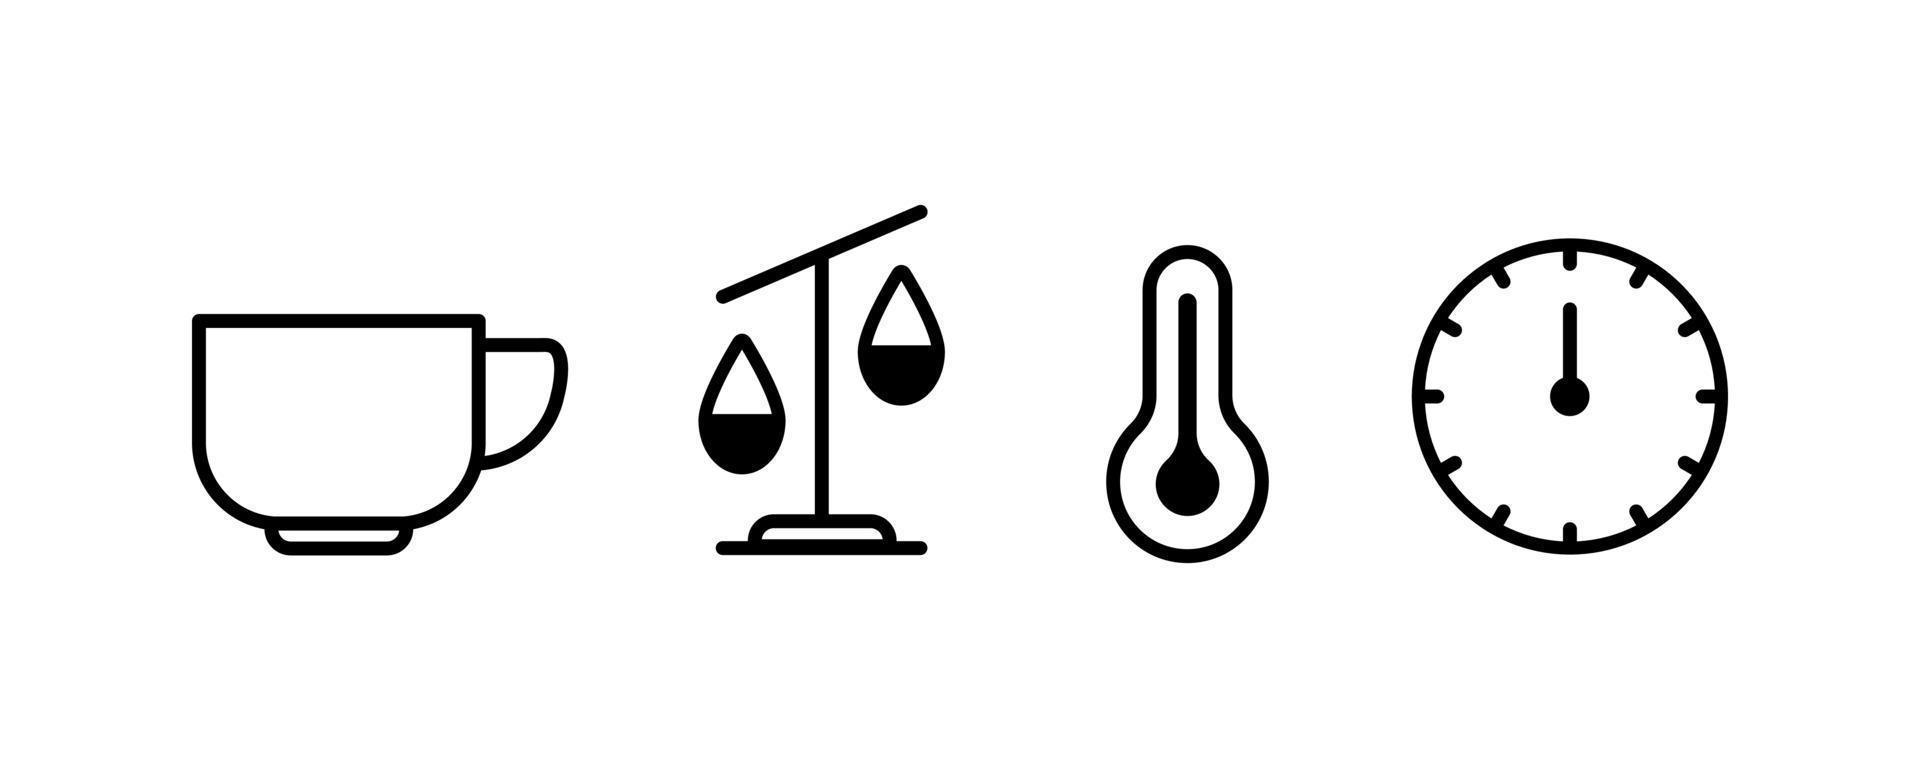 Tea and coffee recipe line icon concept. Hot drink brew instruction. Cup, time, temperature, scales symbols.  Vector illustration